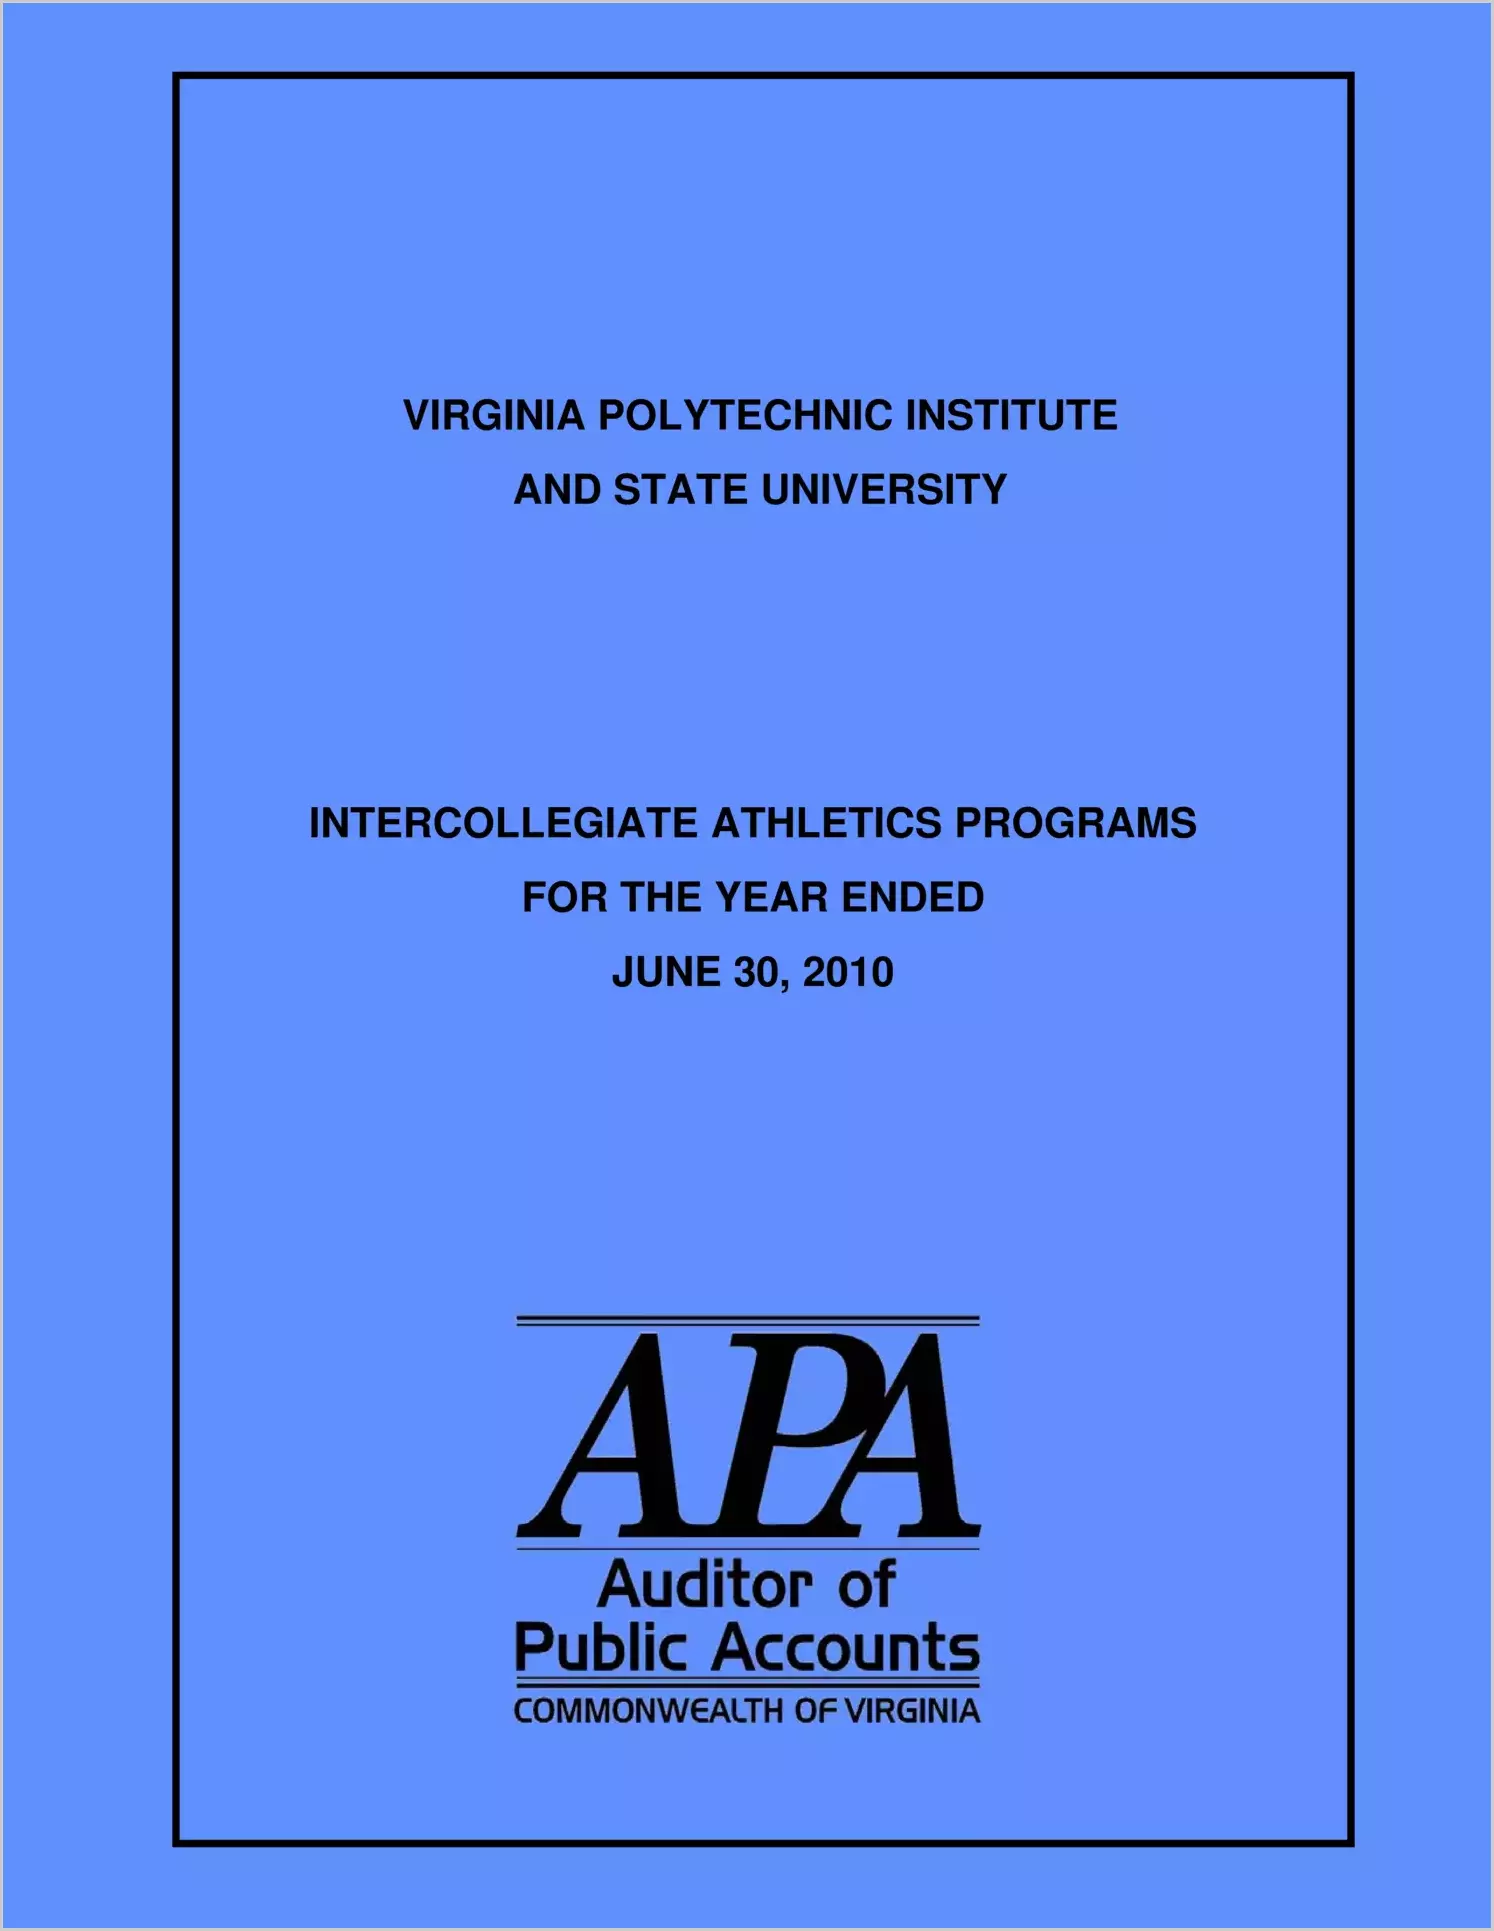 Virginia Polytechnic Institute and State University Intercollegiate Athletic Programs for the year ended June 30, 2010